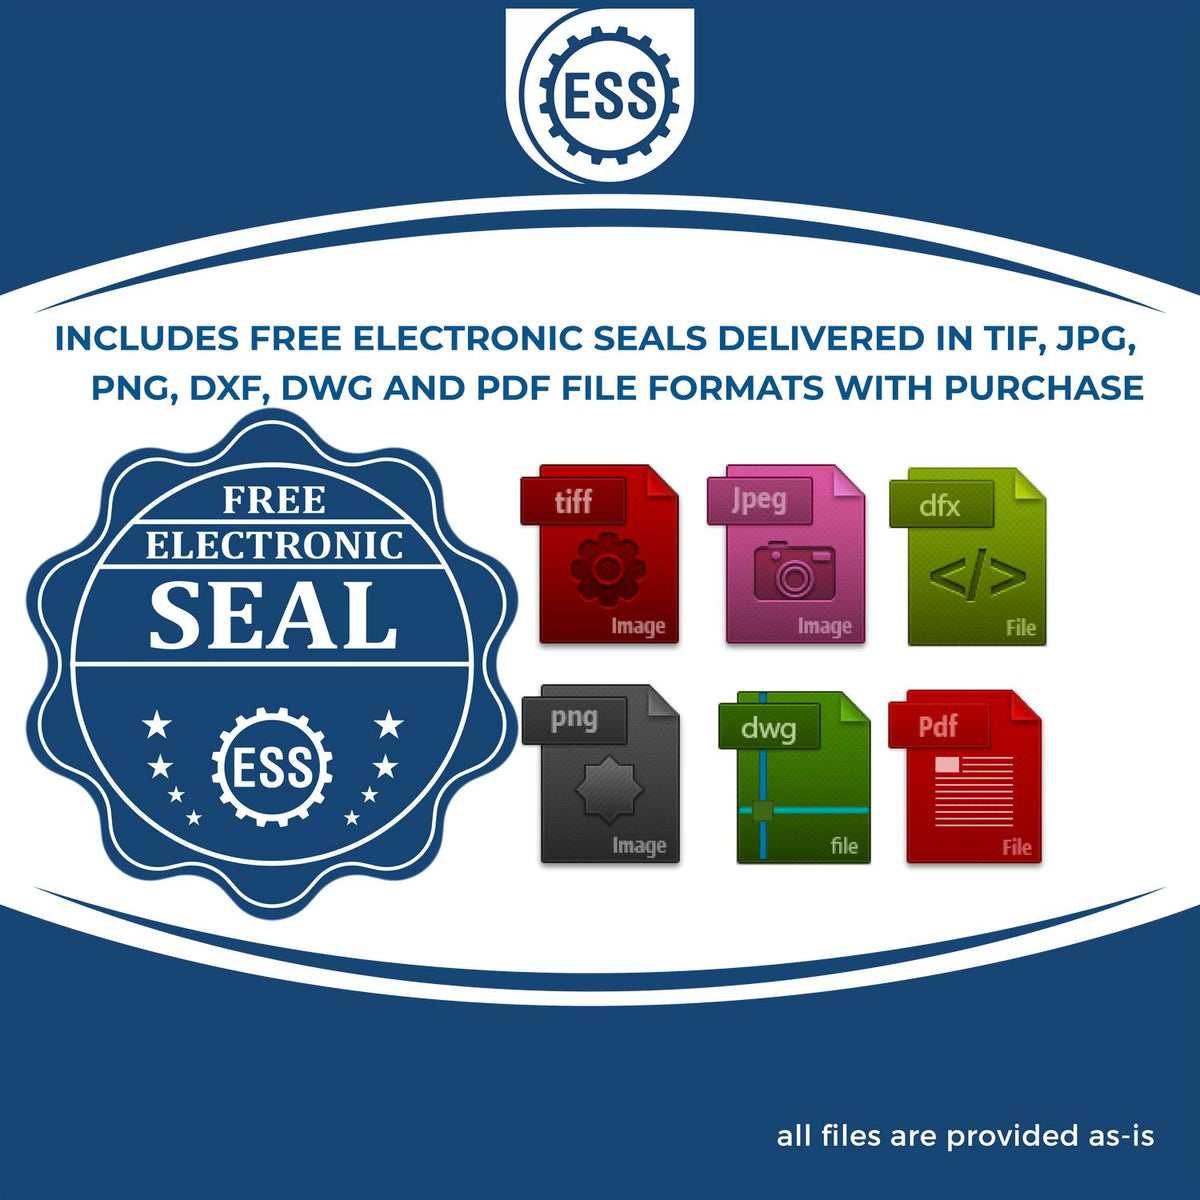 An infographic for the free electronic seal for the Premium MaxLight Pre-Inked Alabama Landscape Architectural Stamp illustrating the different file type icons such as DXF, DWG, TIF, JPG and PNG.